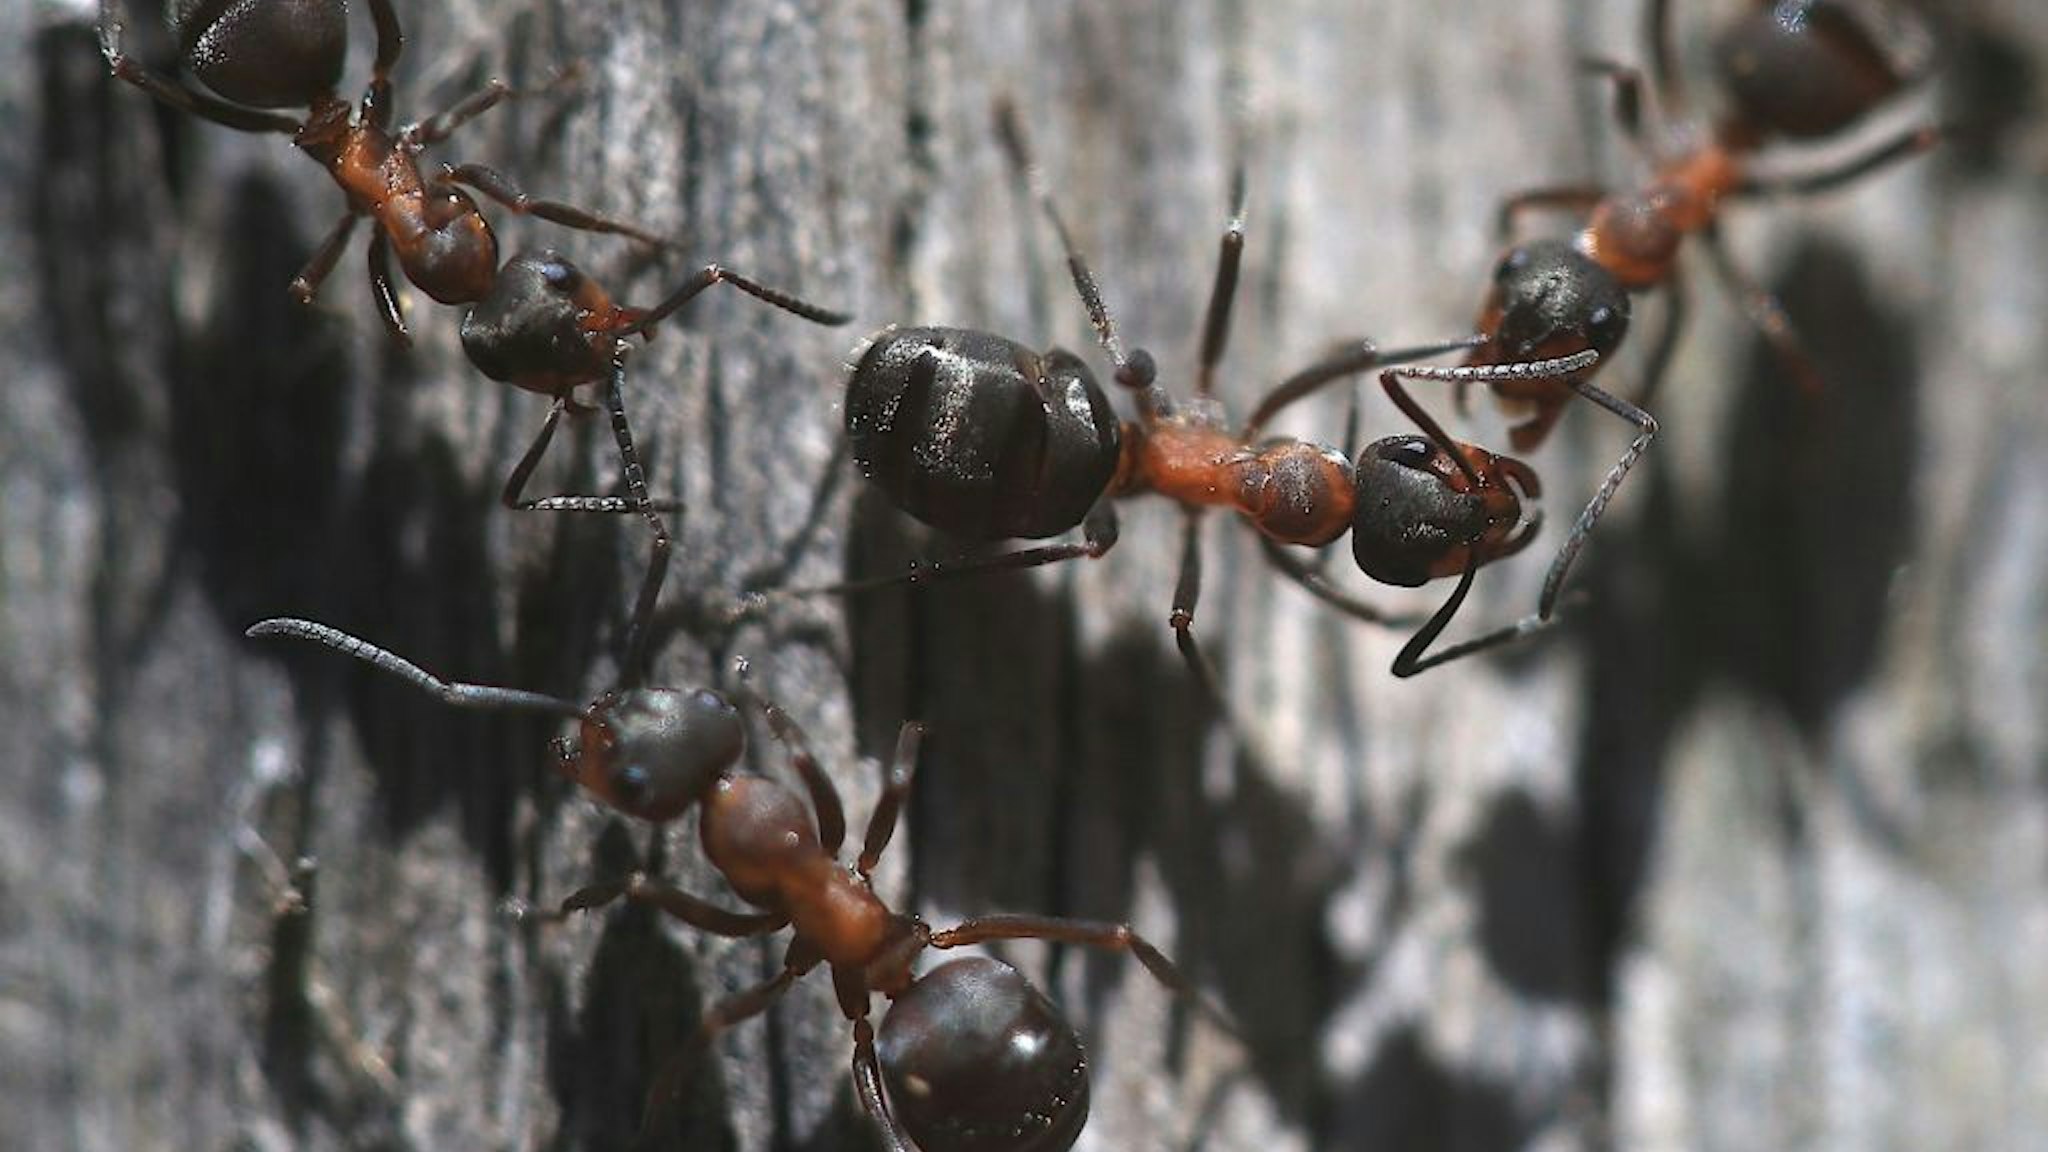 Close-up of red wood ants at Catacik Forests in Mihaliccik district of Turkey's Eskisehir province on July 25, 2019.